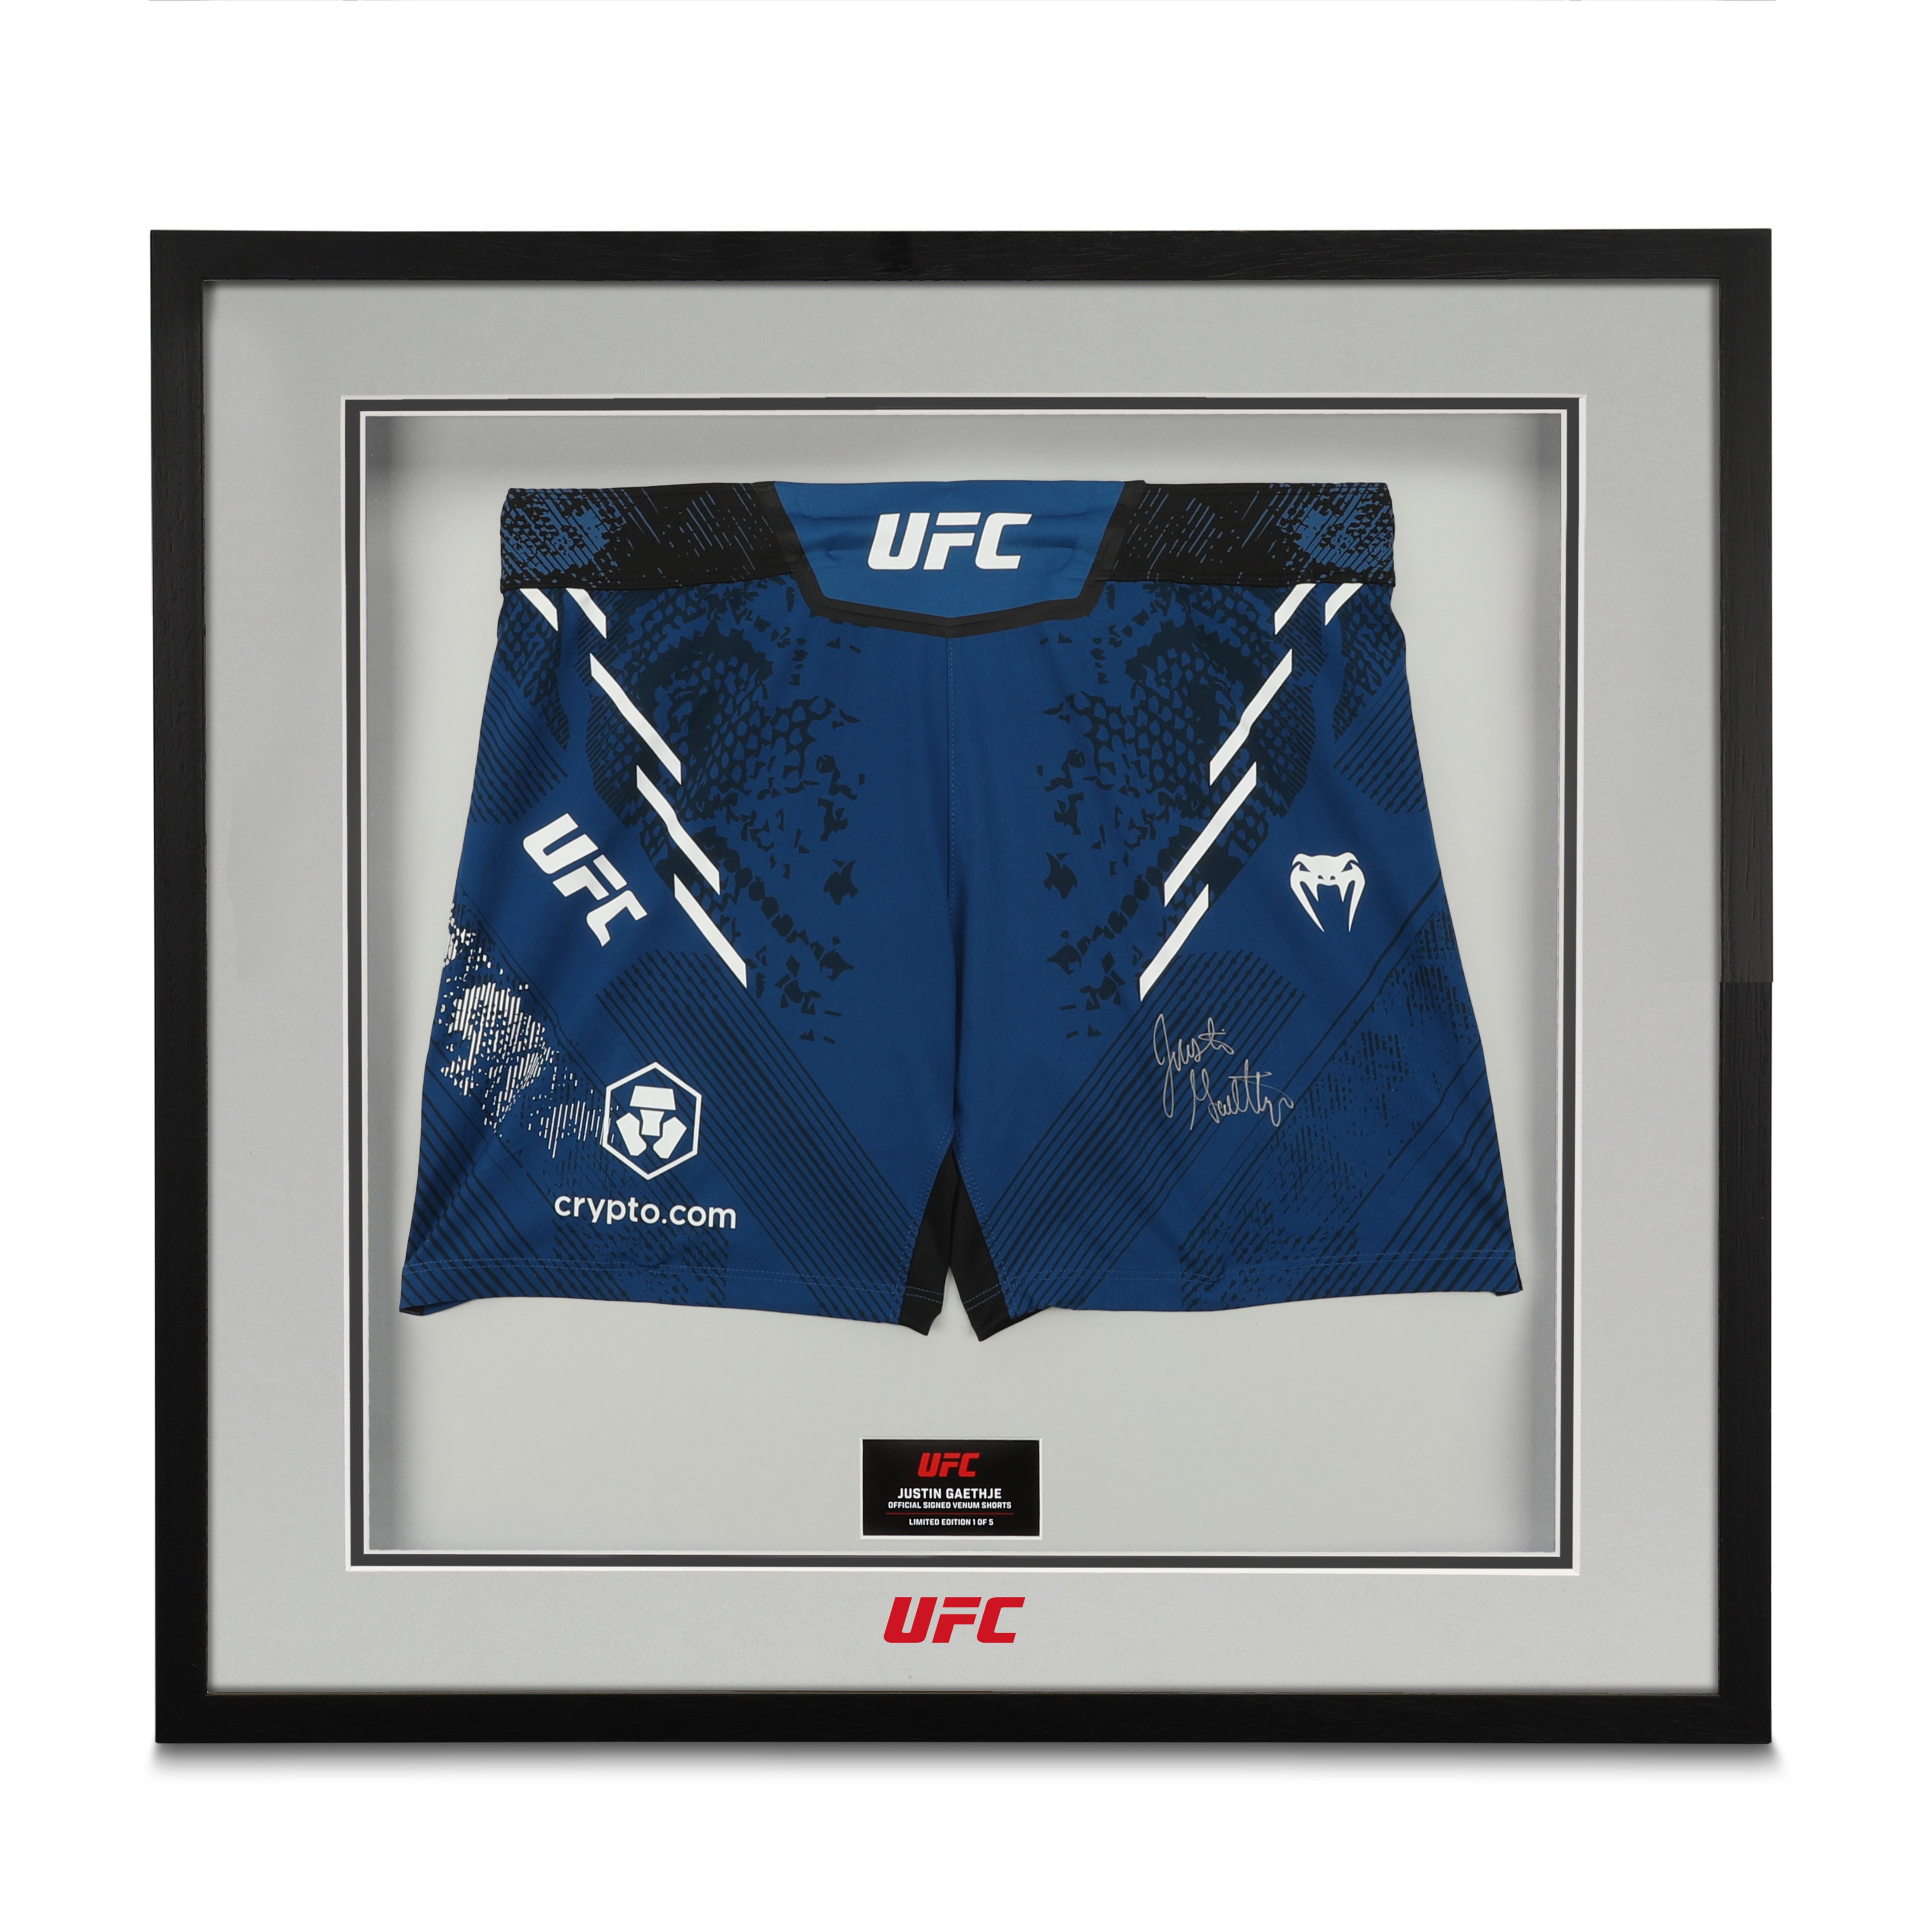 UFC Fight Worn Shorts, Official UFC Fighter Shorts